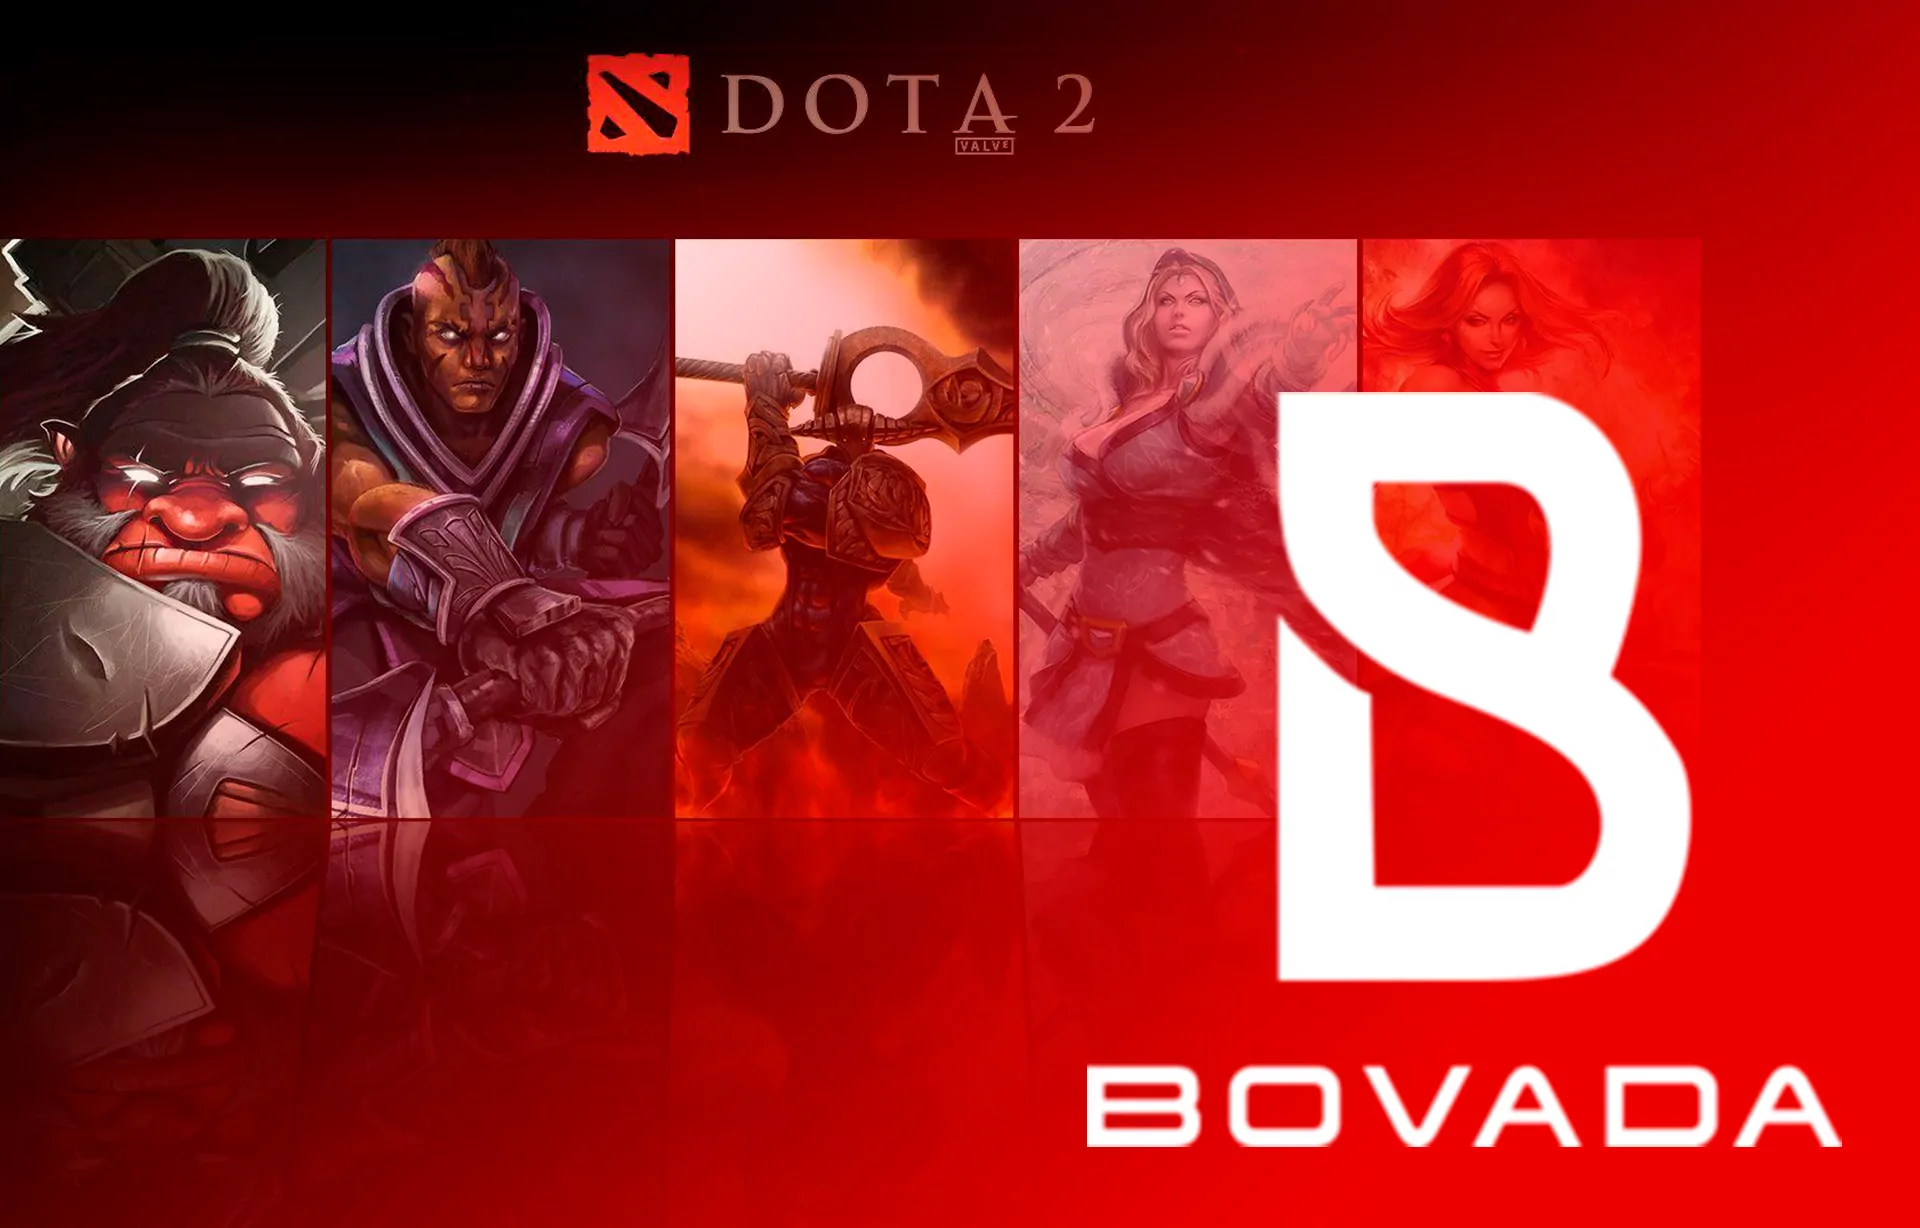 A dynamically developing Esports discipline in the world, you can place bets in the Bovada application: a specific map, the best player or the overall outcome of the match.